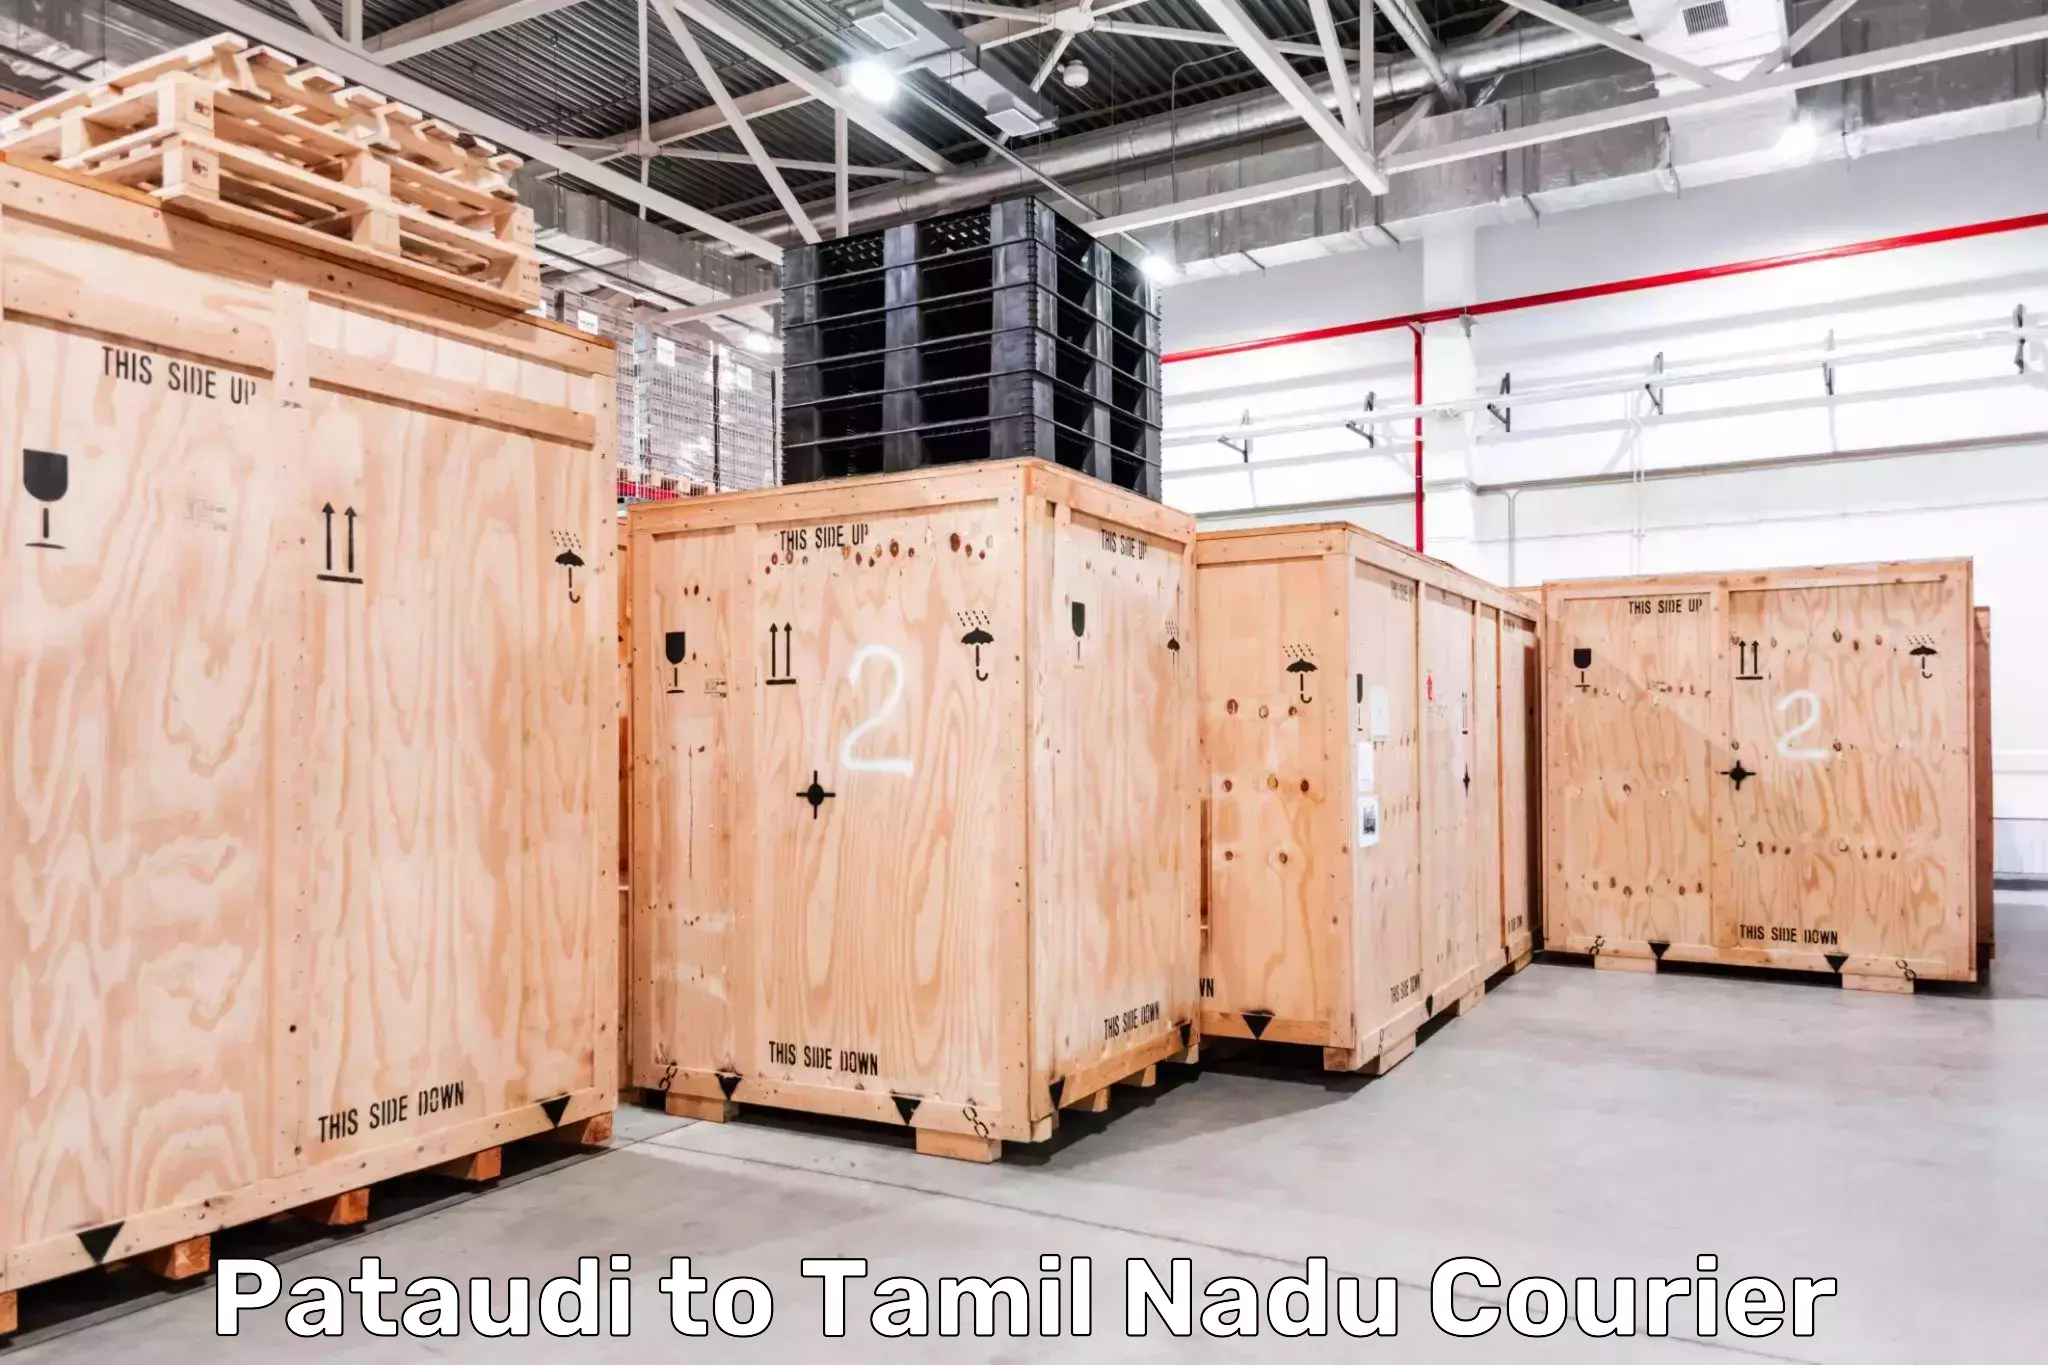 Nationwide shipping capabilities Pataudi to Karunya Institute of Technology and Sciences Coimbatore